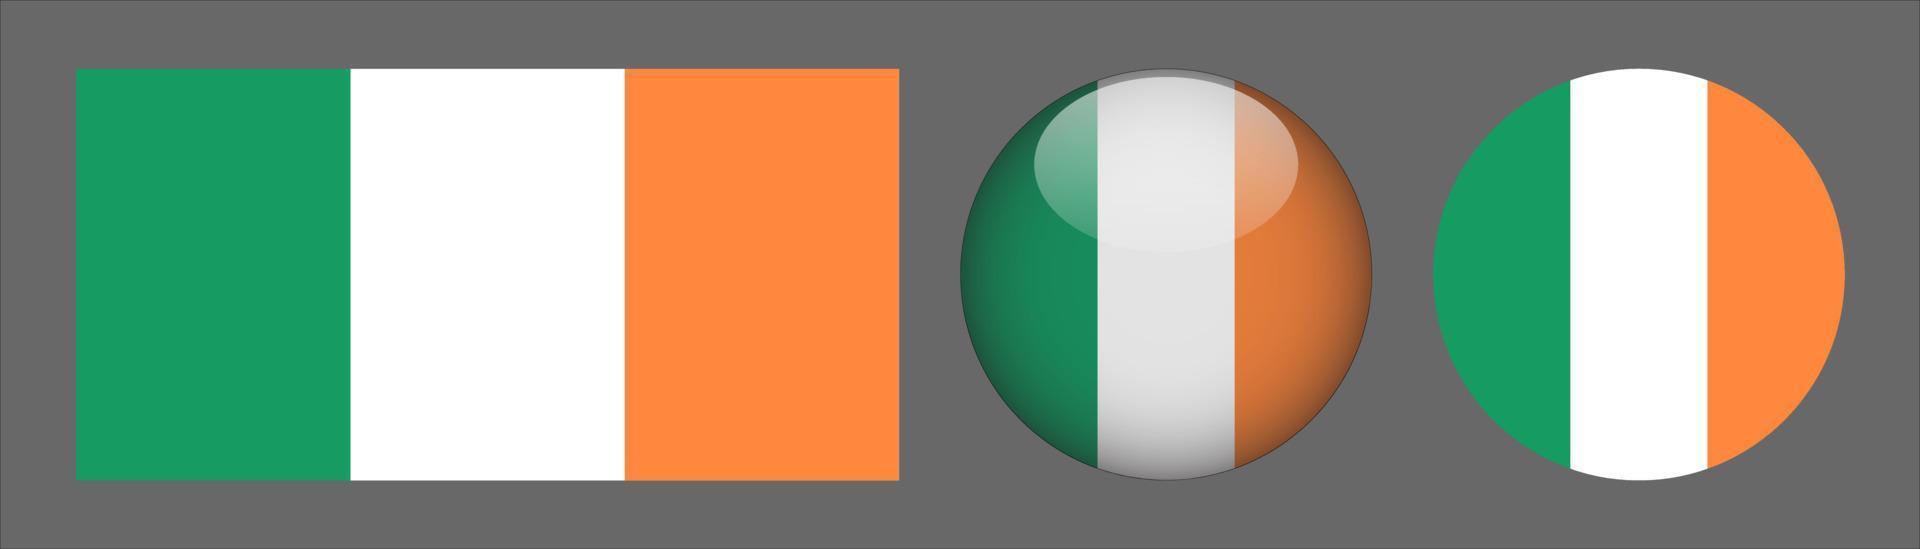 Ireland Flag Set Collection, Original Size Ratio, 3d Rounded and Flat Rounded vector